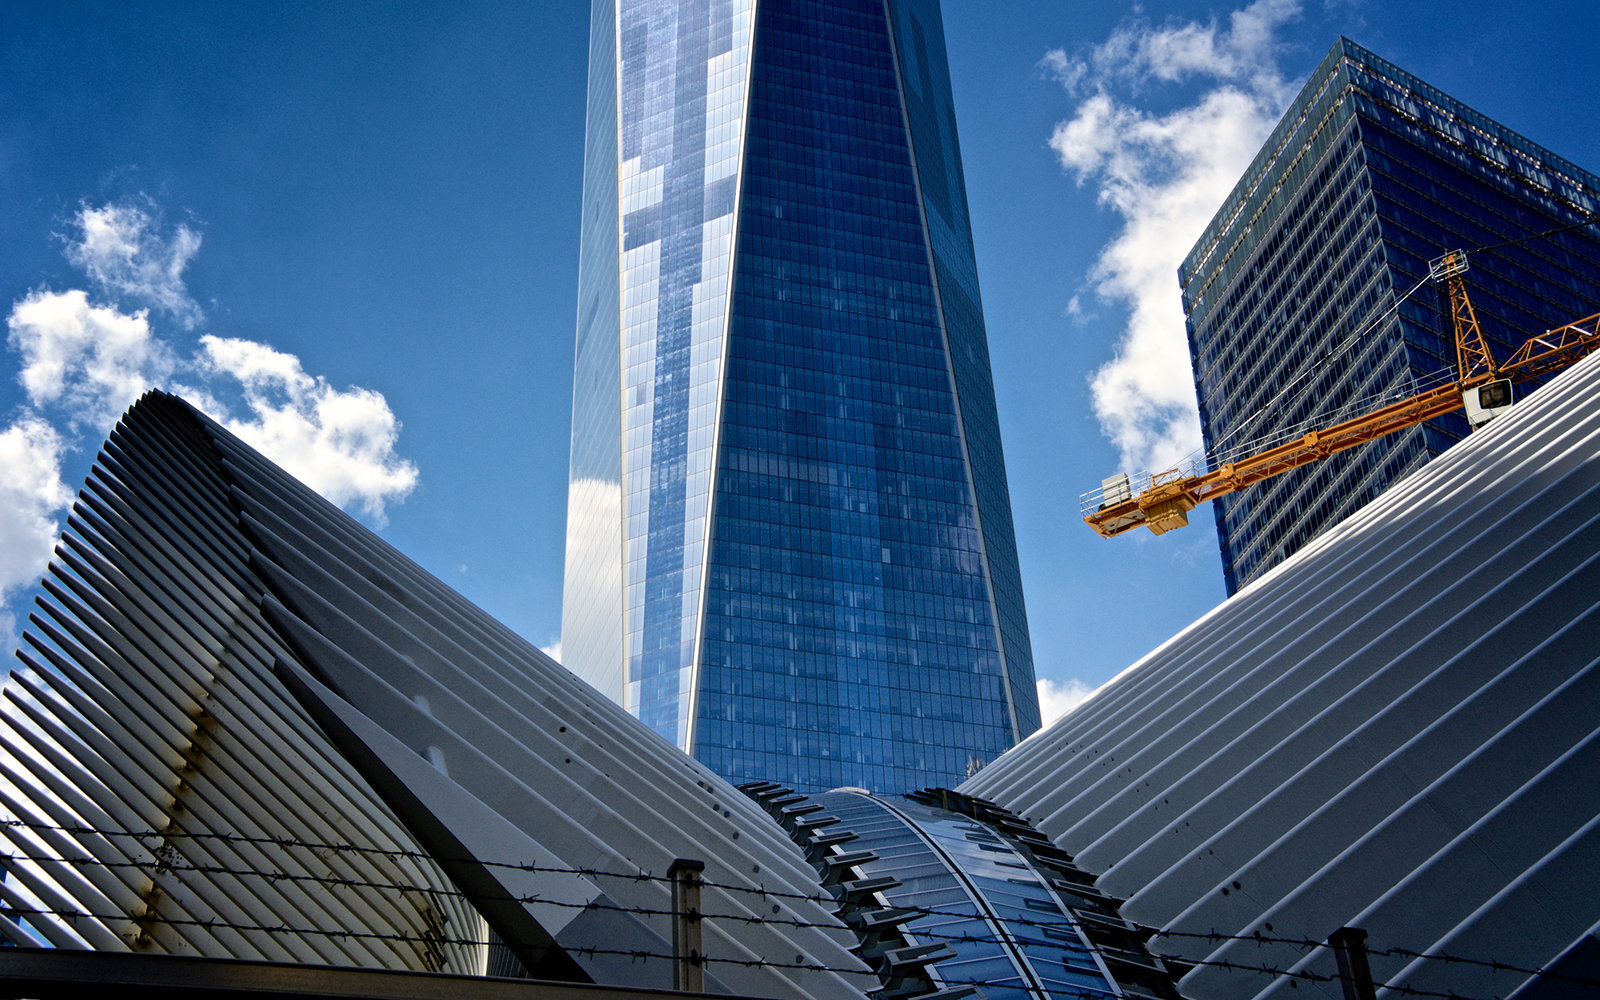 The Oculus, ONE World Trade Center Cityscape, Lower Manhattan, NYC